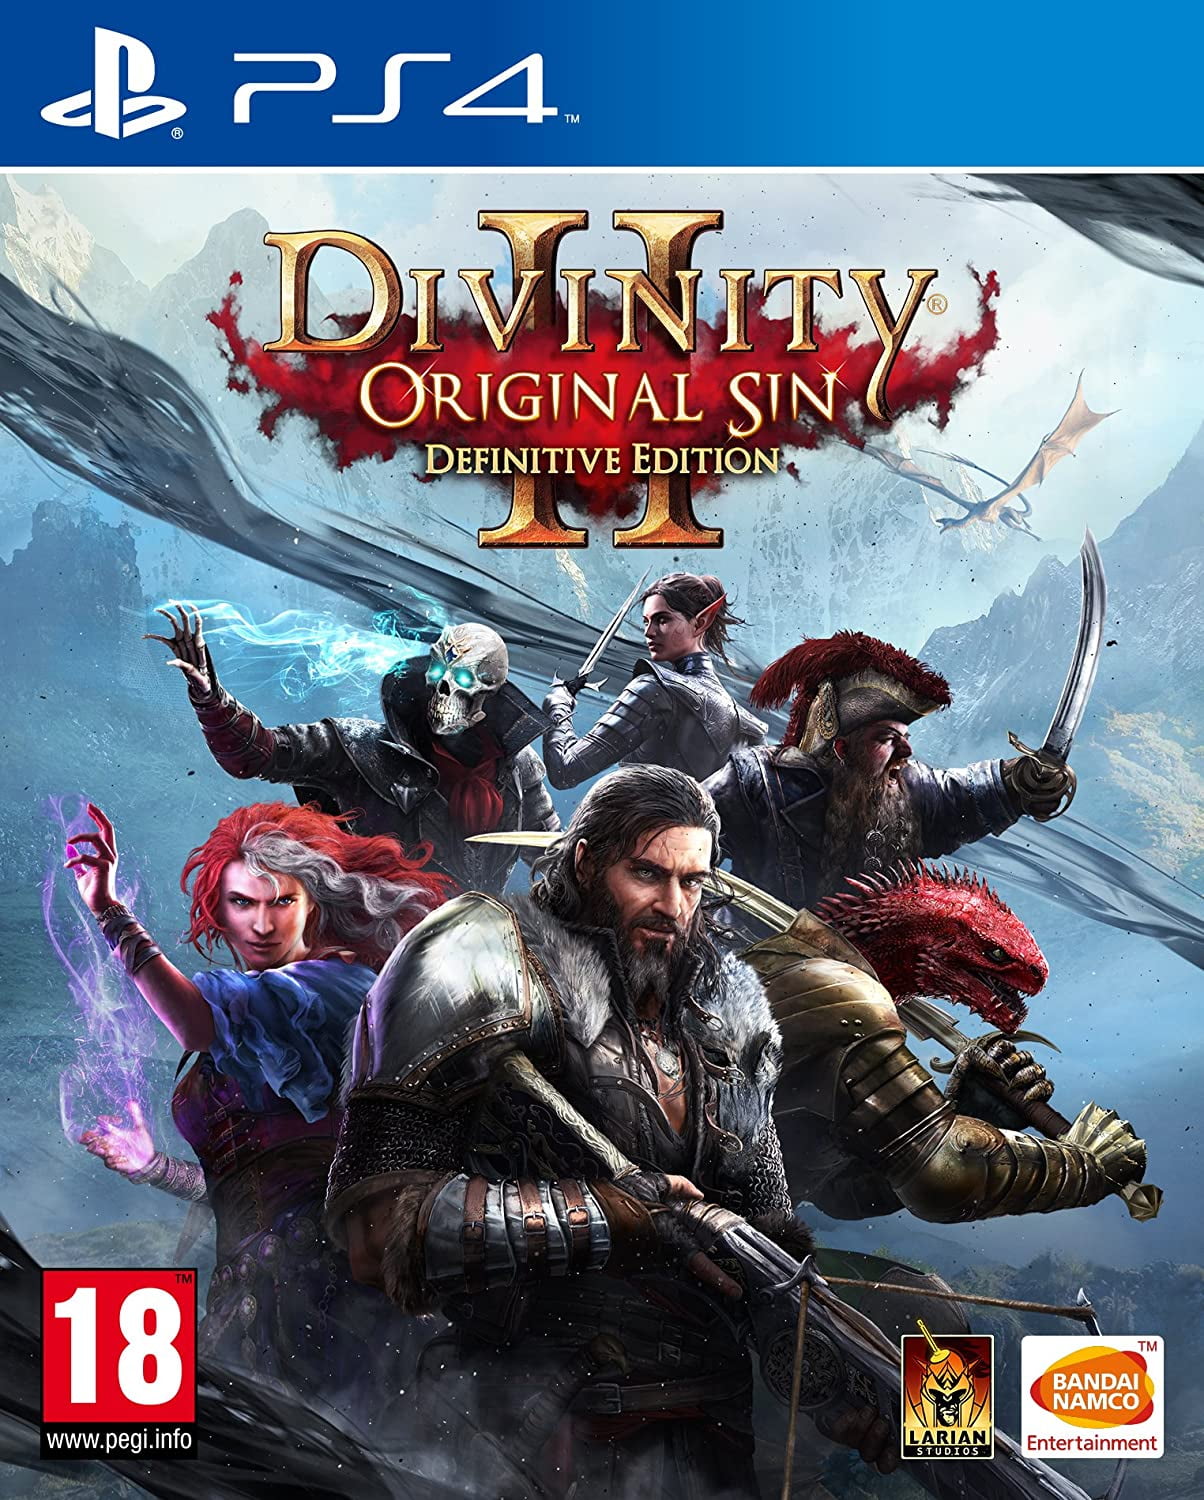 Divinity Original Sin 2: Definitive Edition (PS4 / Playstation 4) The Divine is Dead. Only You Can Save the World